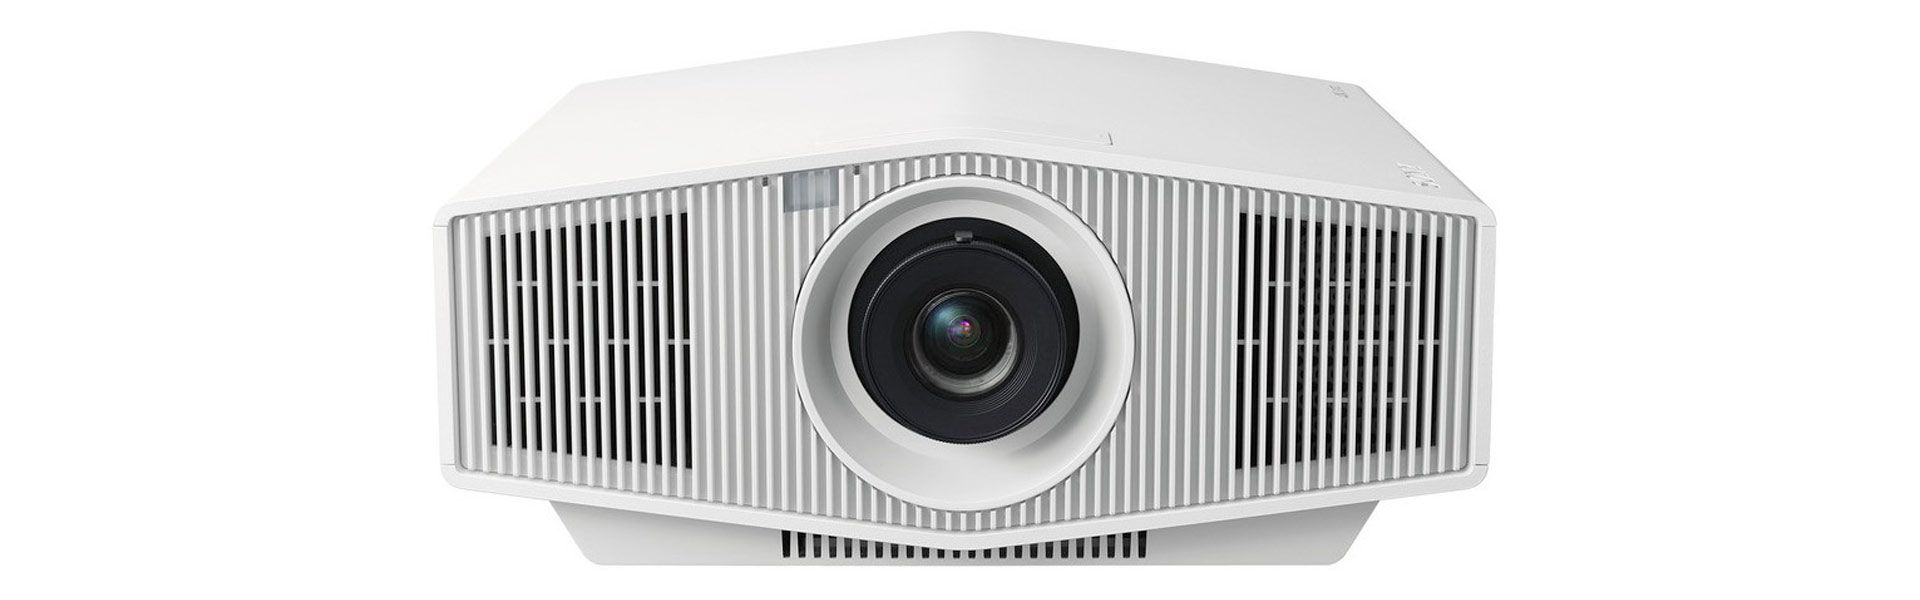 Sony projectors from Projectorpoint